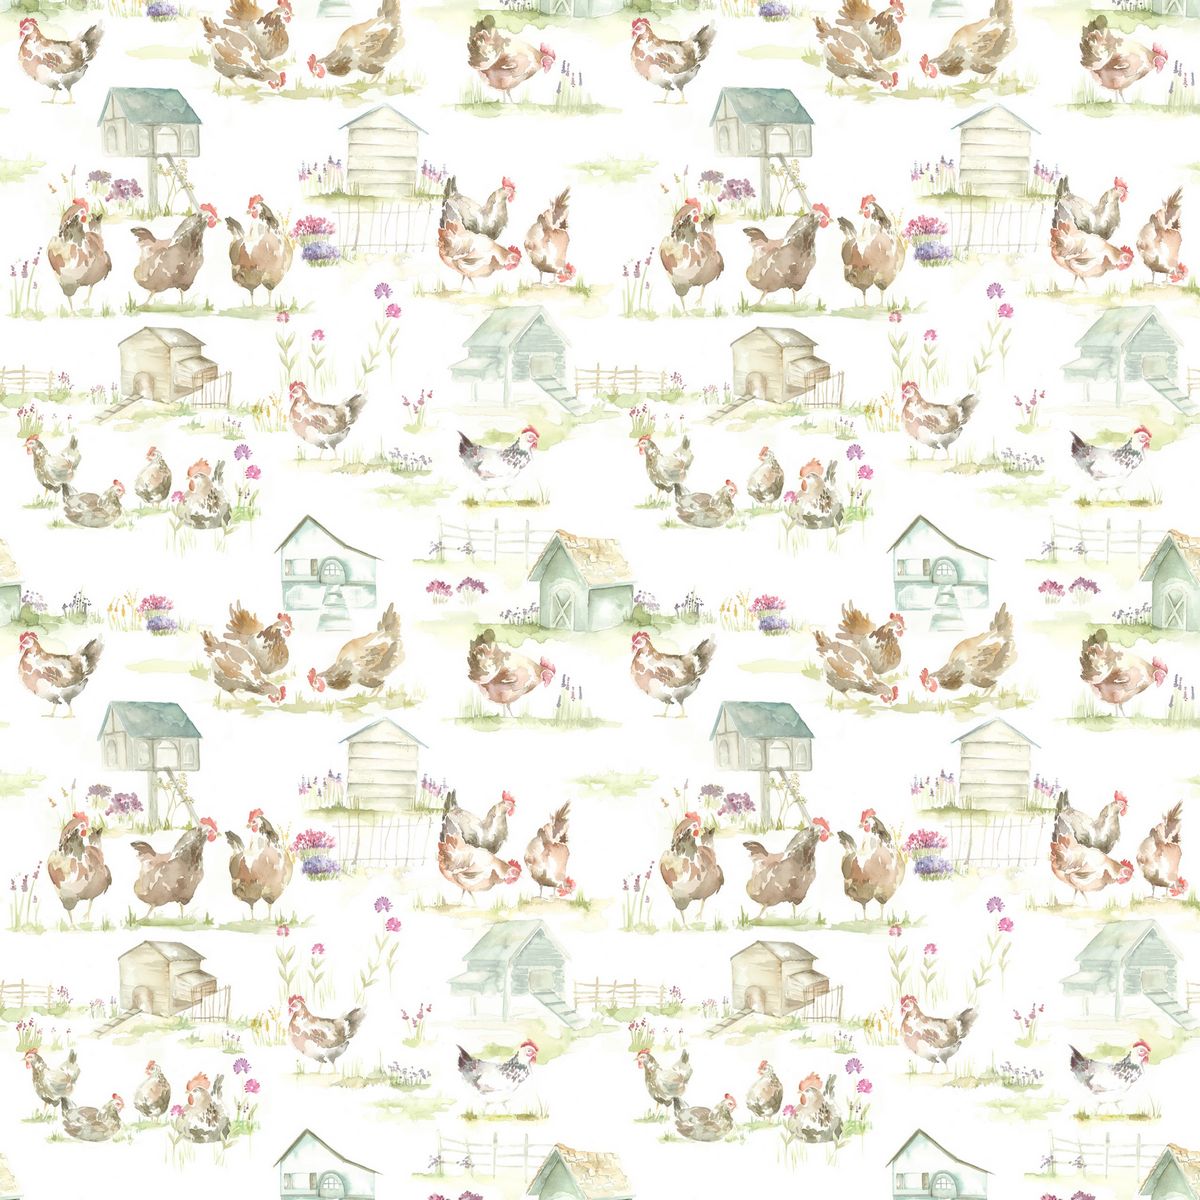 Henny Penny Linen Fabric by Voyage Maison